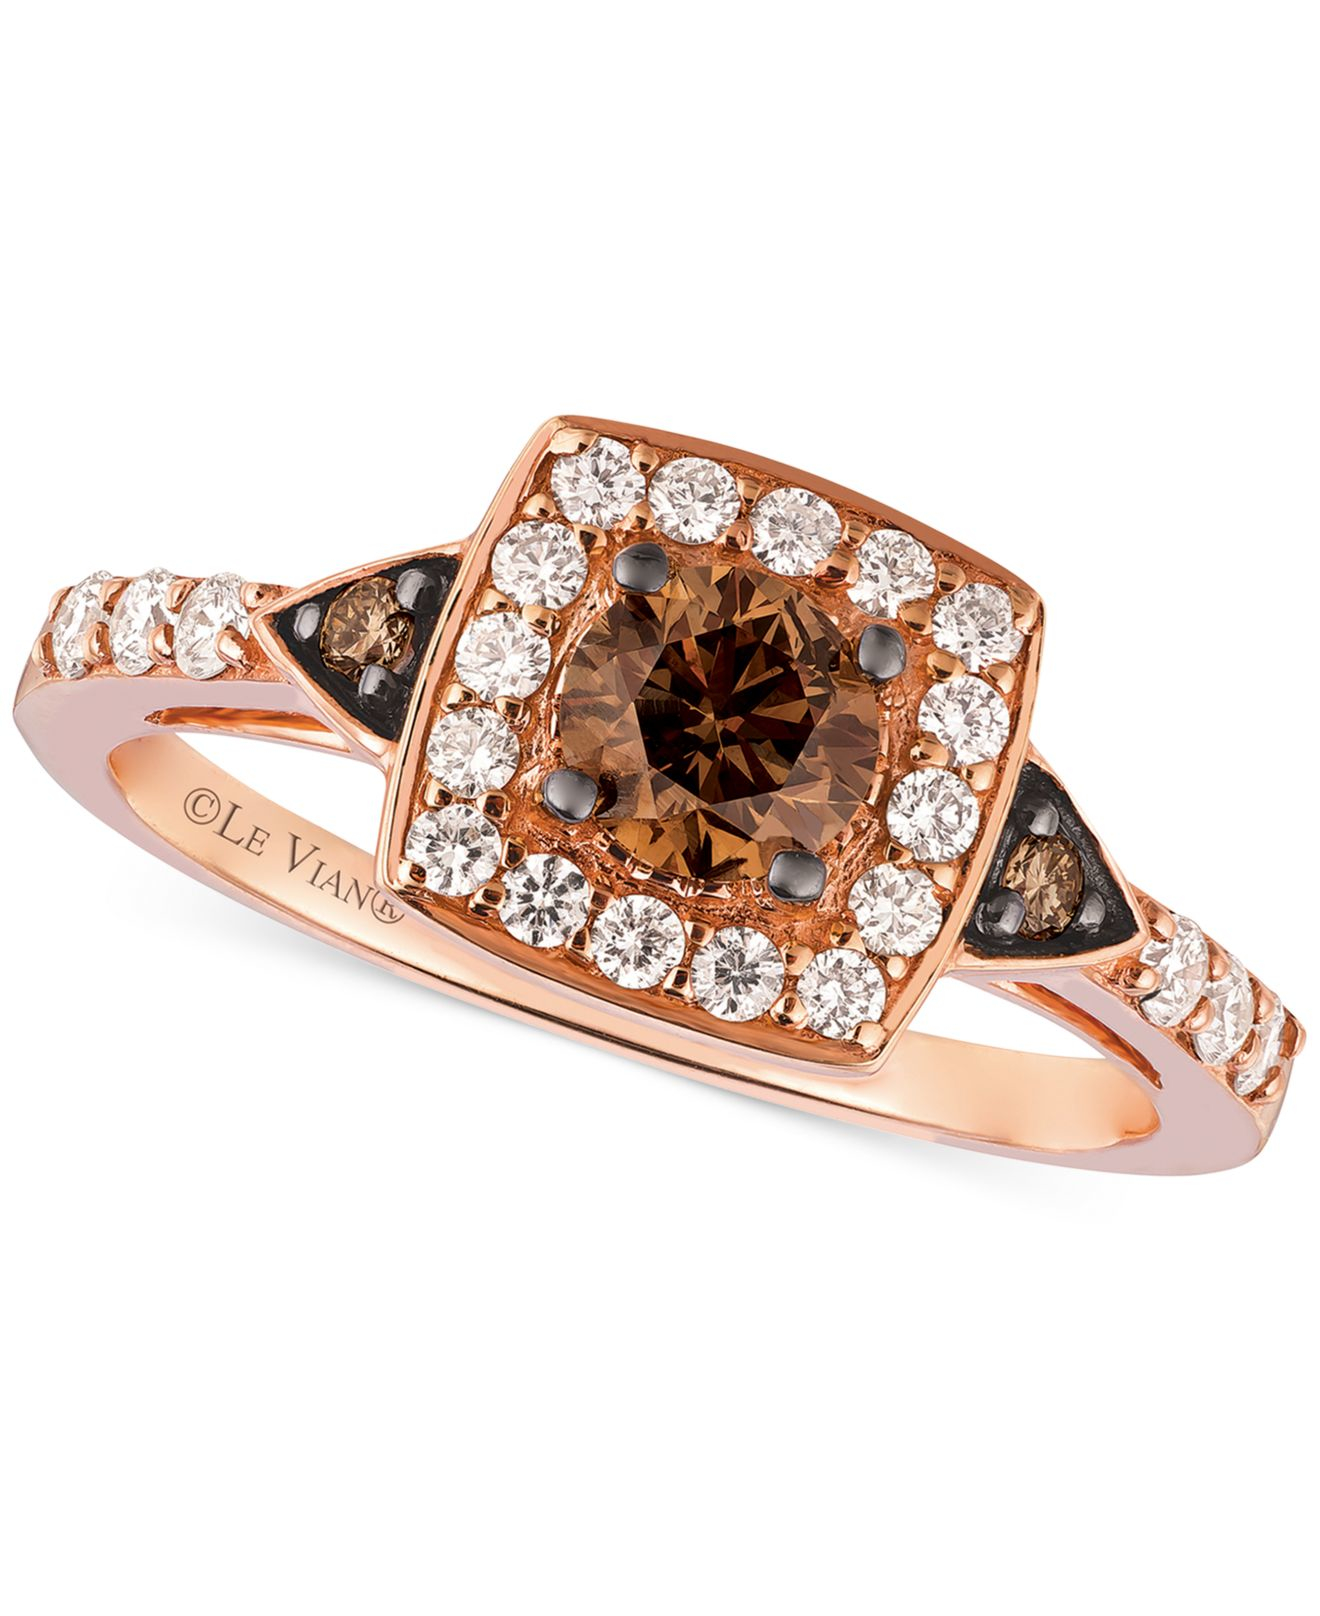 Lyst Le Vian Chocolate Diamond And White Diamond Ring In 14k Rose Gold (7/8 Ct. T.w.) in Red